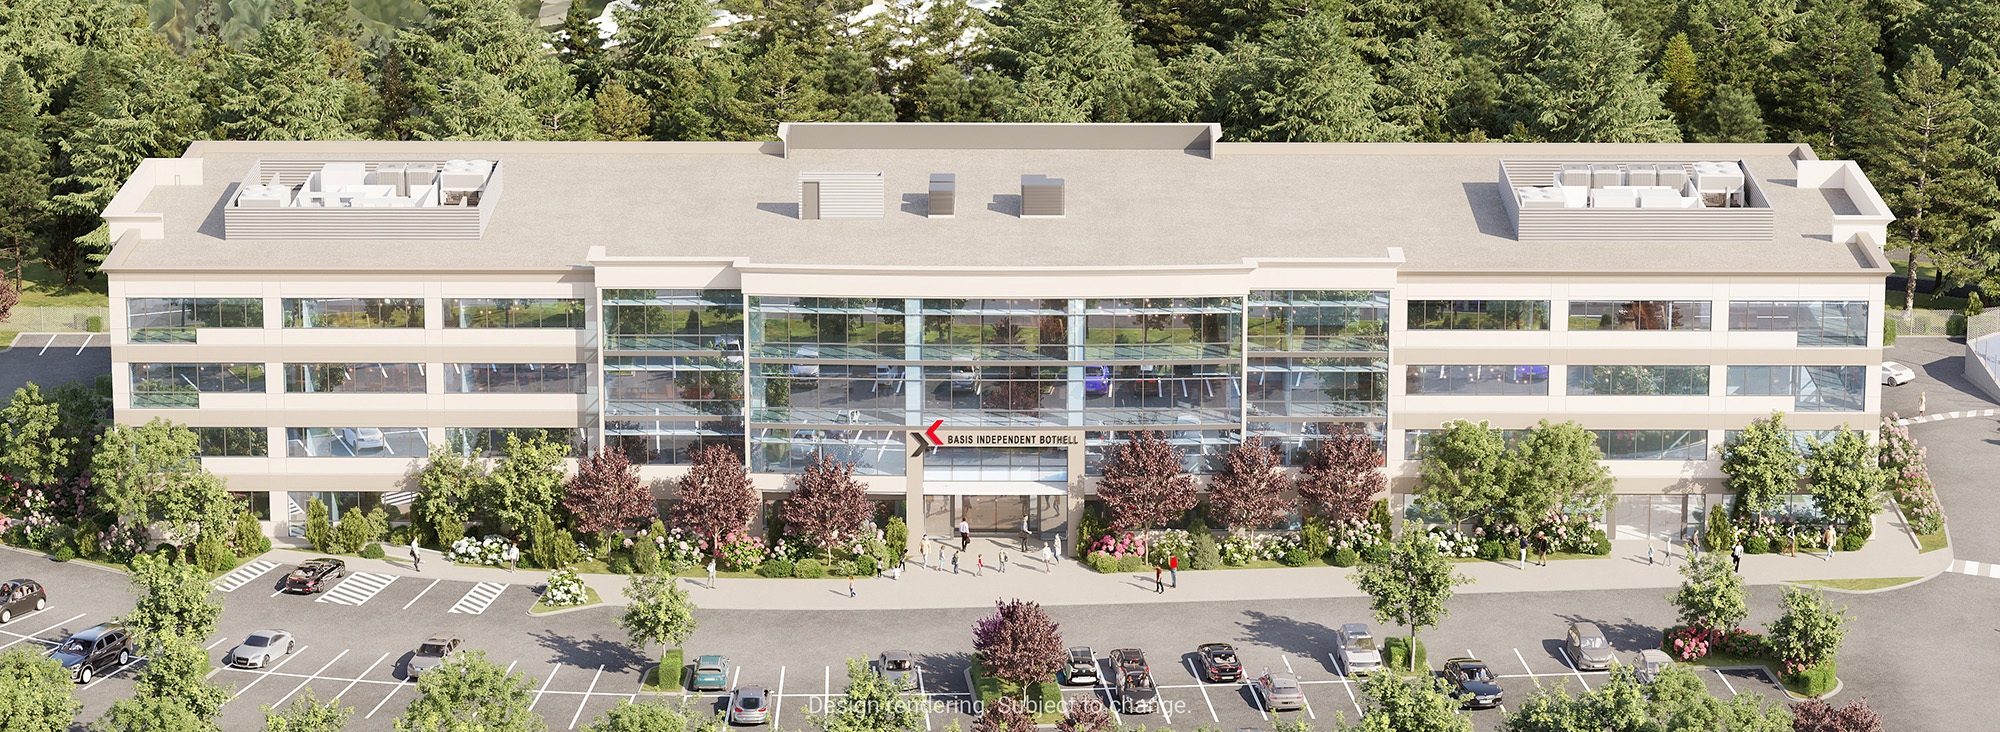 BASIS Independent Bothell rendering